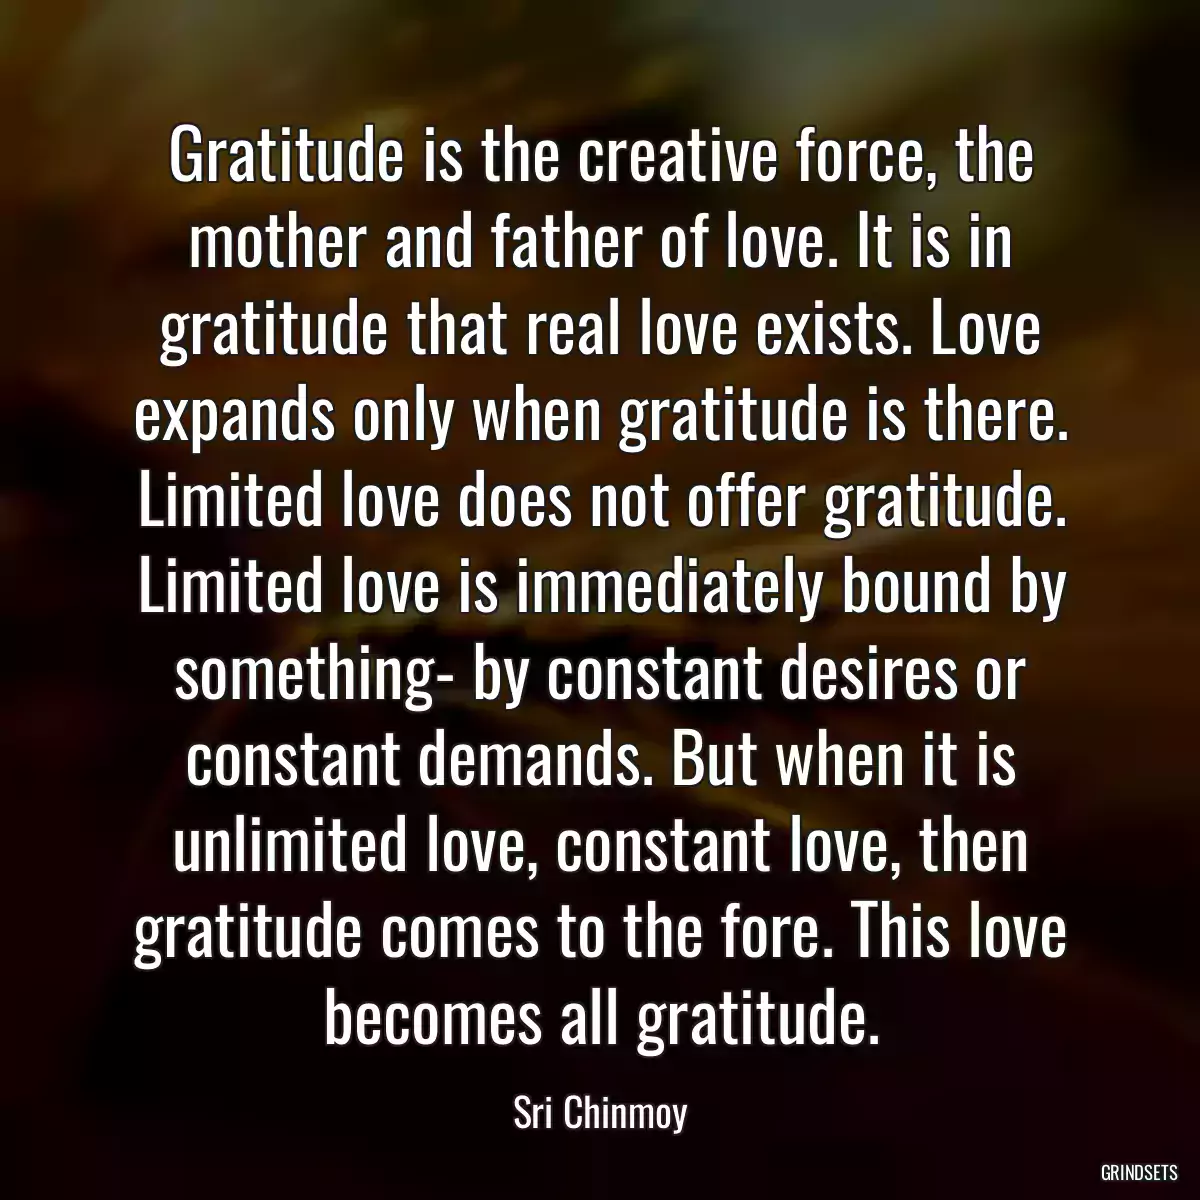 Gratitude is the creative force, the mother and father of love. It is in gratitude that real love exists. Love expands only when gratitude is there. Limited love does not offer gratitude. Limited love is immediately bound by something- by constant desires or constant demands. But when it is unlimited love, constant love, then gratitude comes to the fore. This love becomes all gratitude.